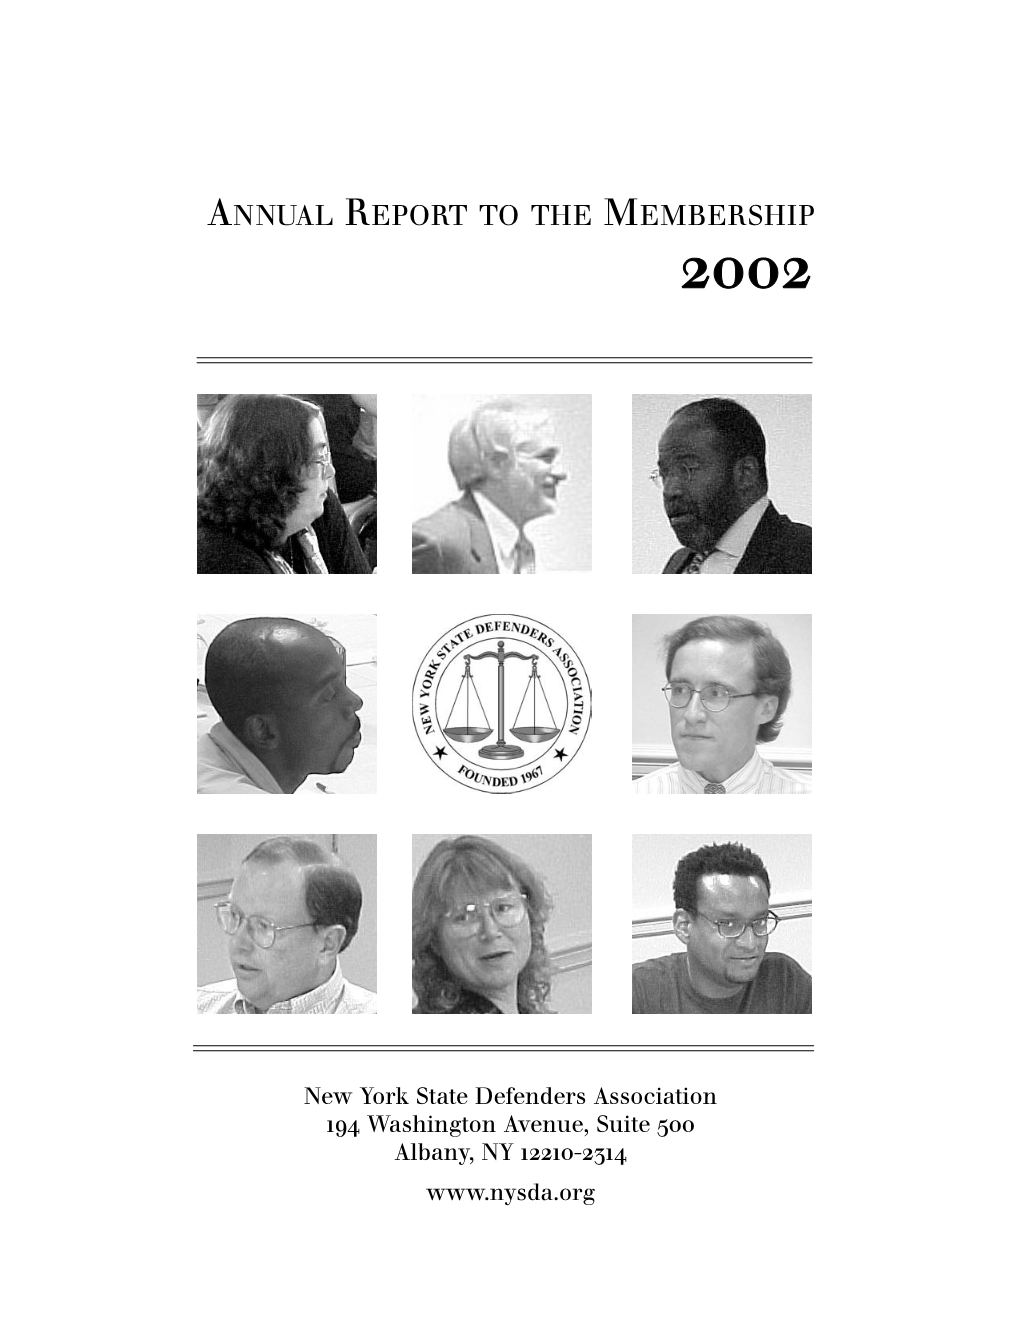 2002 Annual Report to the Membership